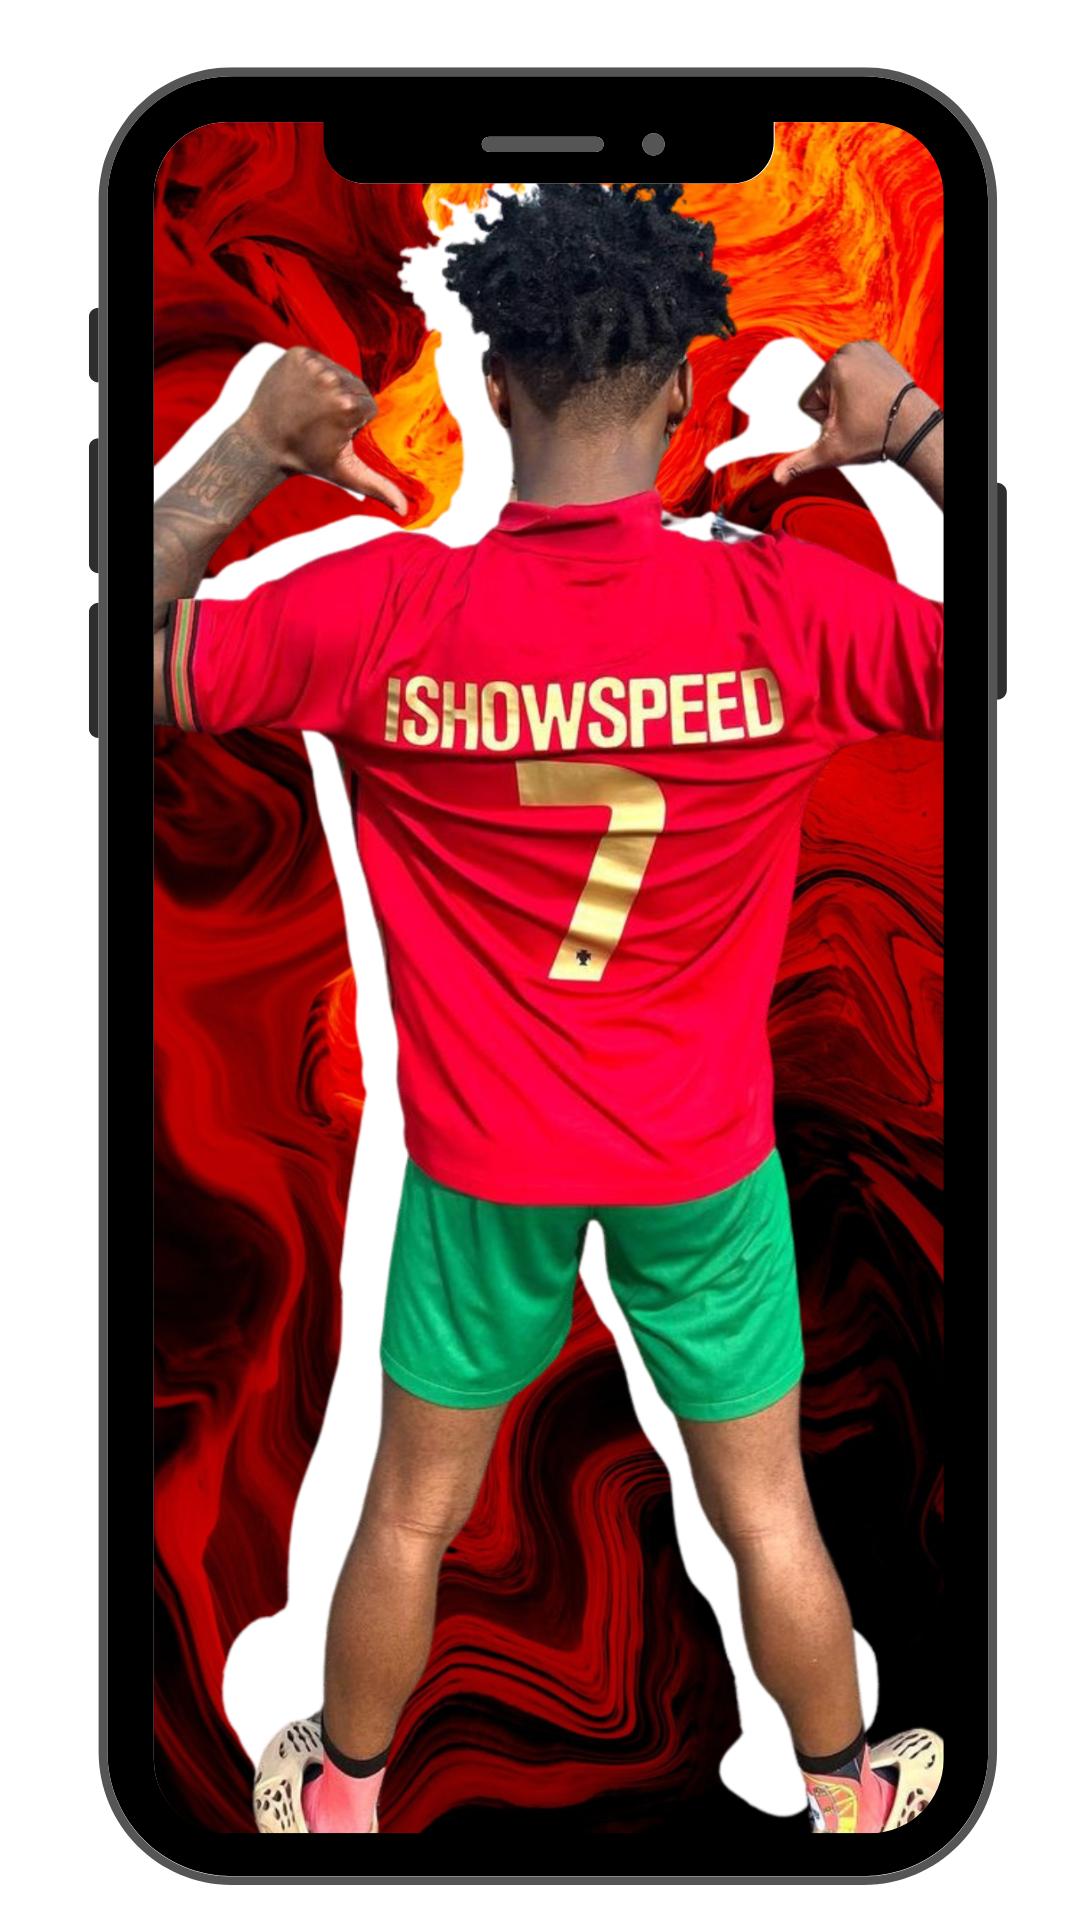 IshowSpeed Wallpaper – Apps no Google Play